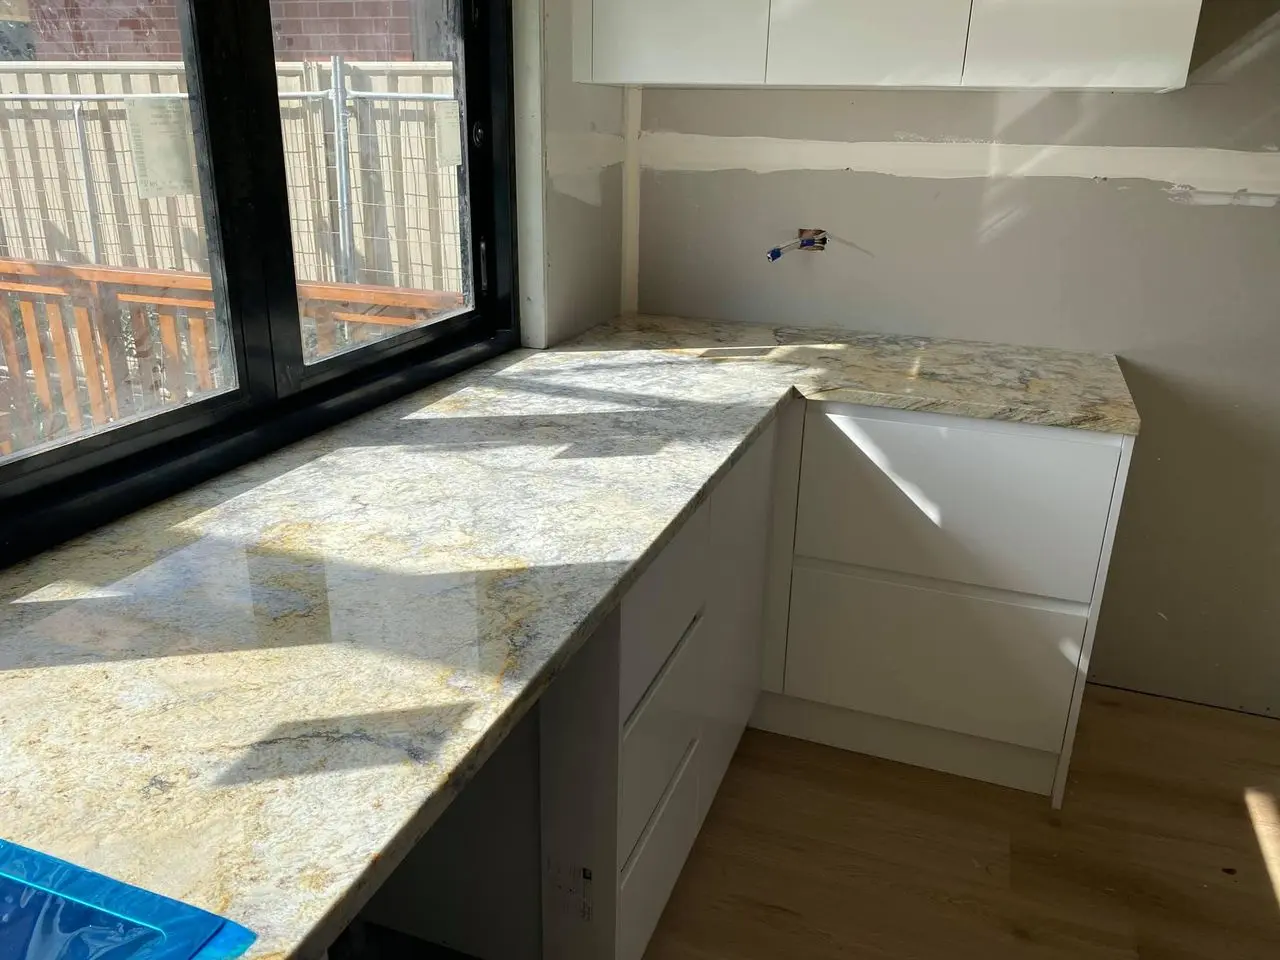 Image of a benchtop from a review left by a client for SA Marble and Granite.